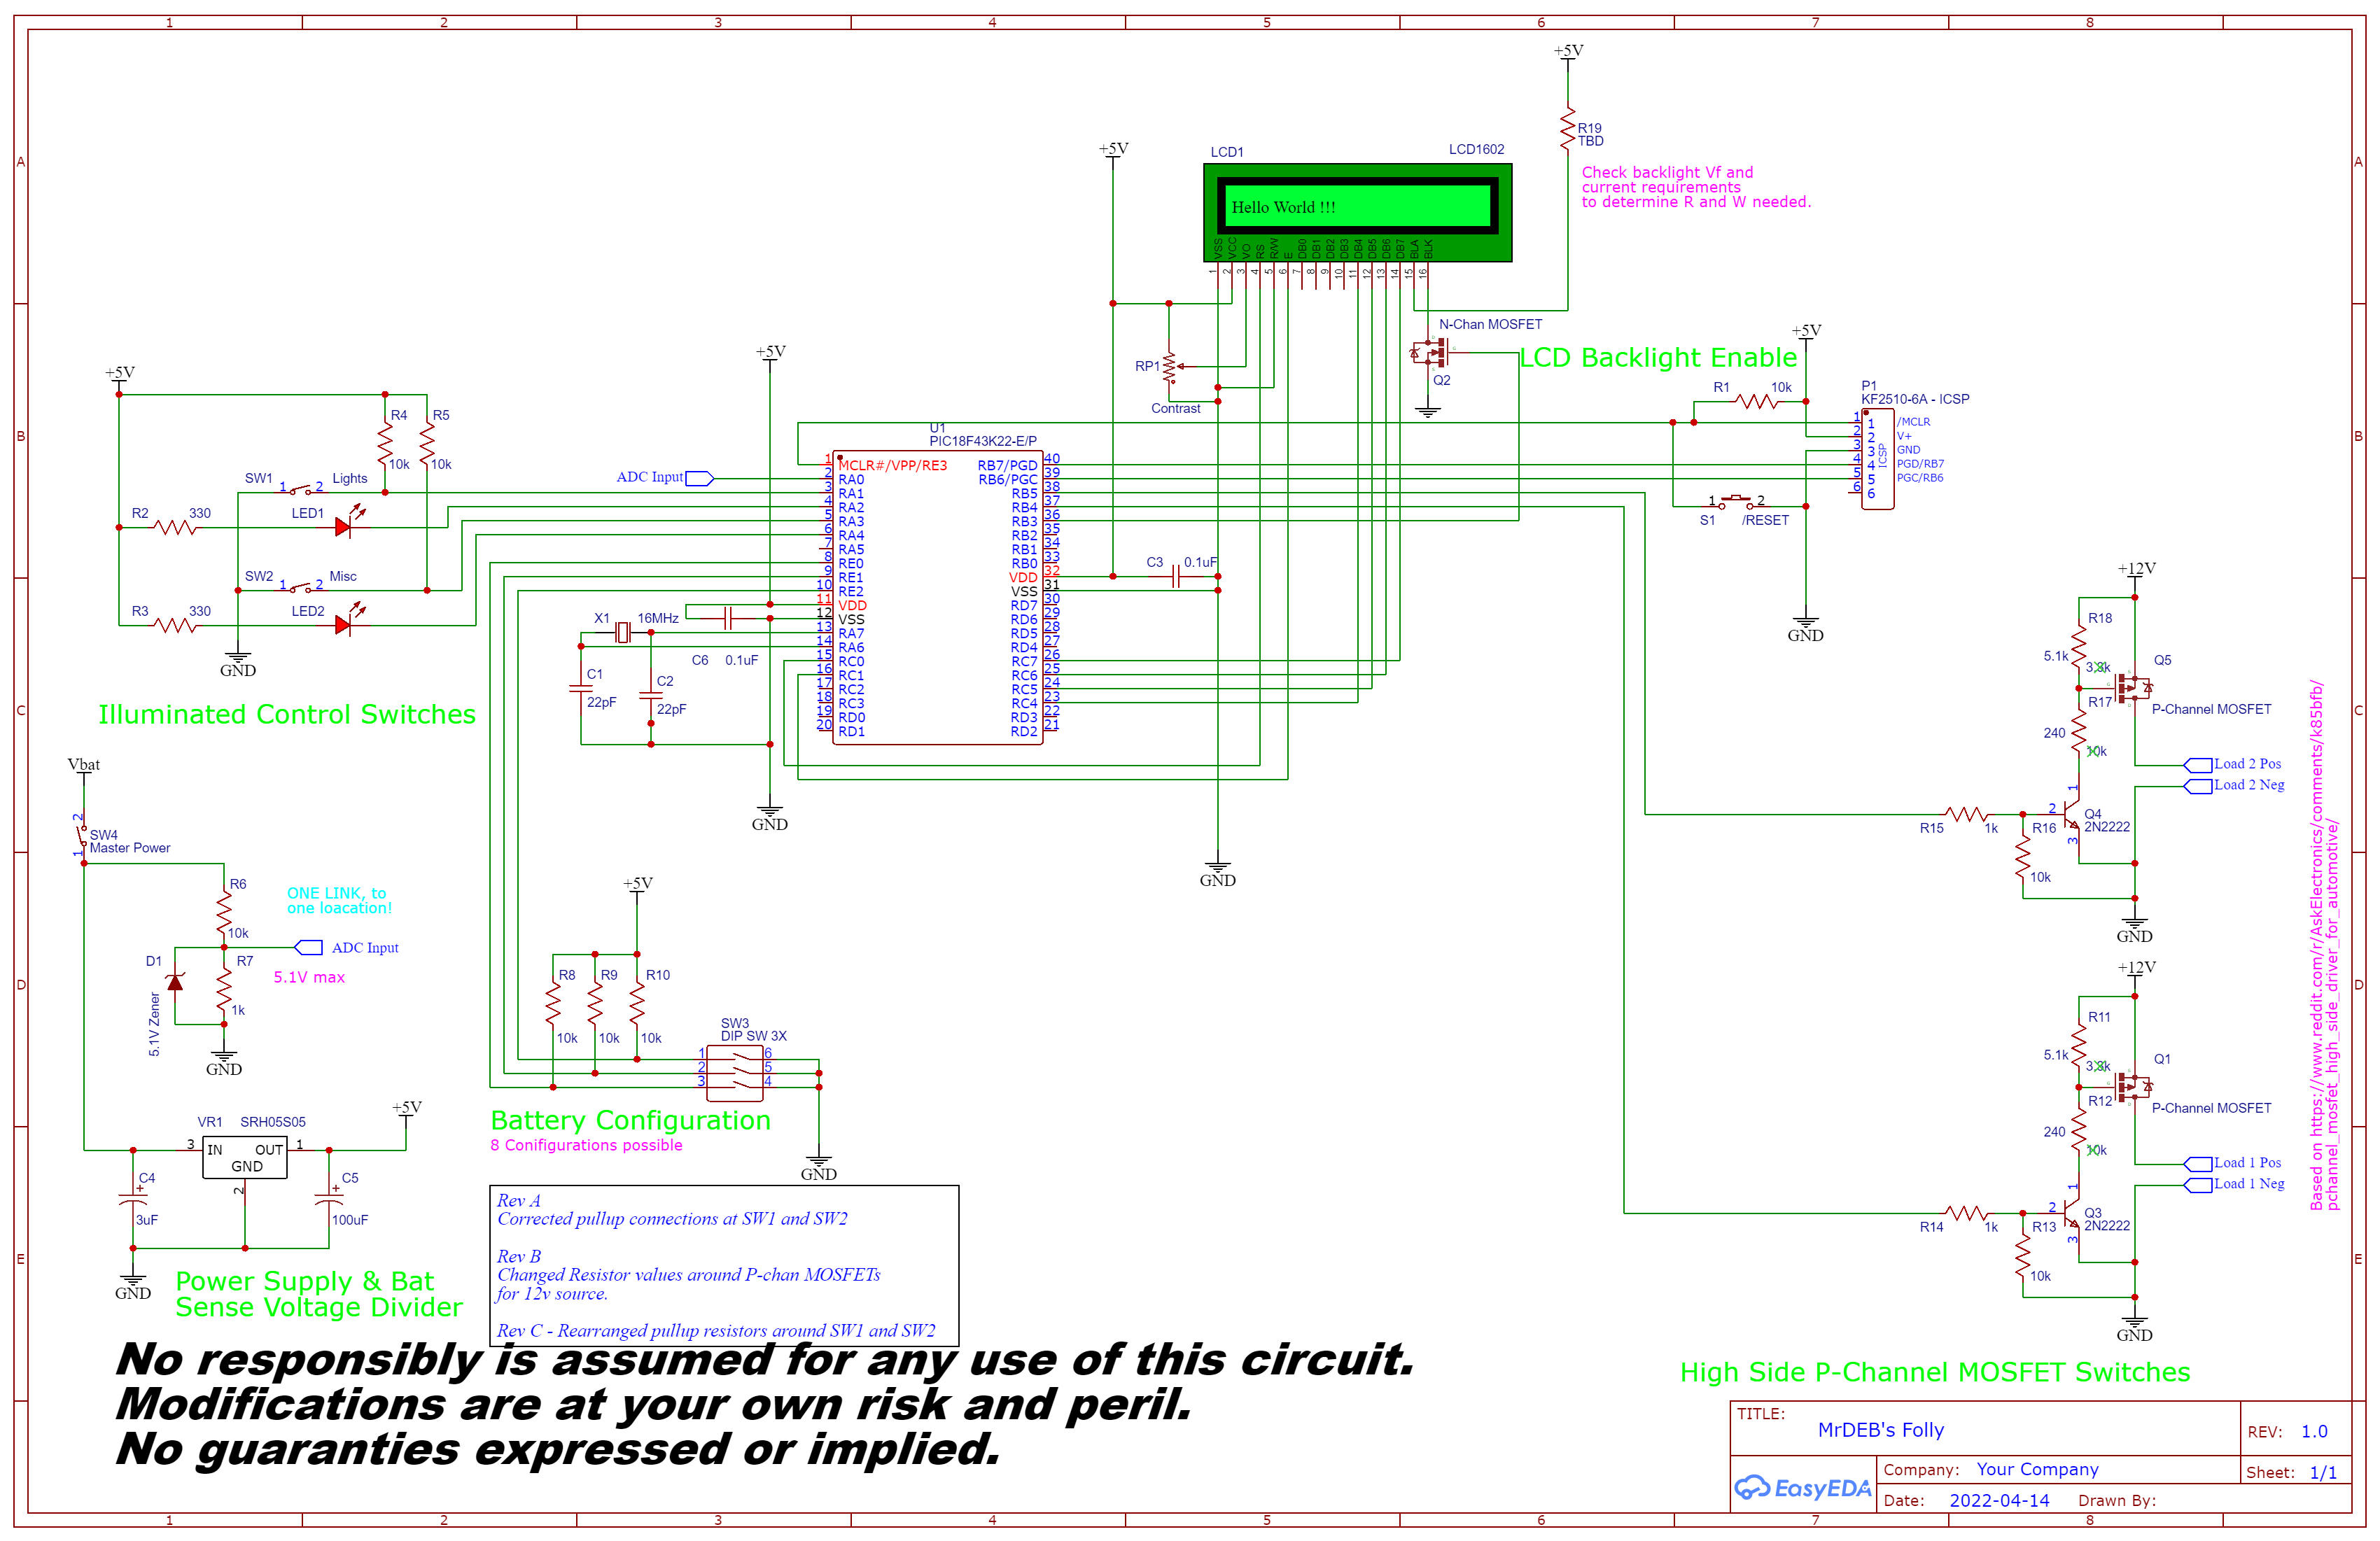 Schematic_another deb folly_2022-04-15.png